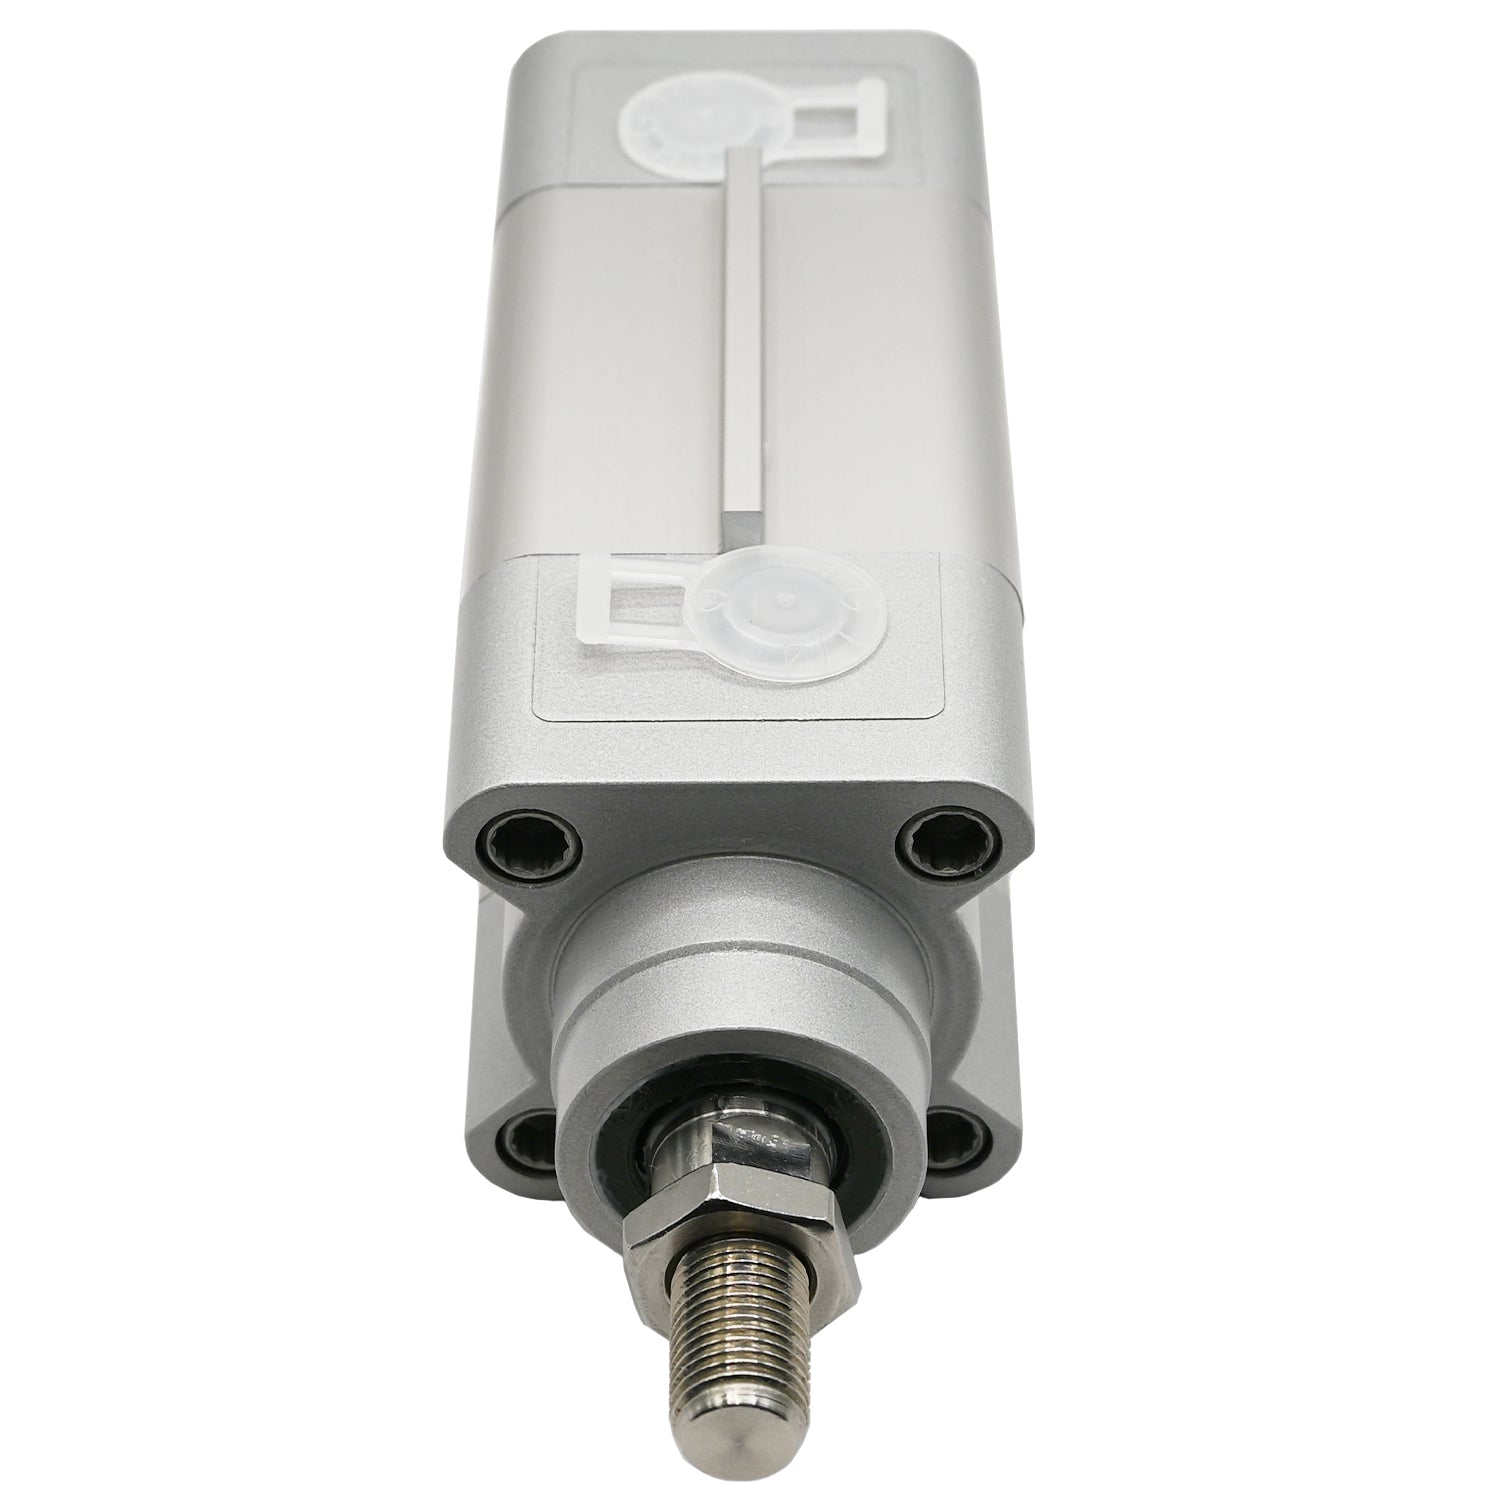 Pneumatic cylinder on white background. Cylinder's threaded cylinder rod and seal are shown